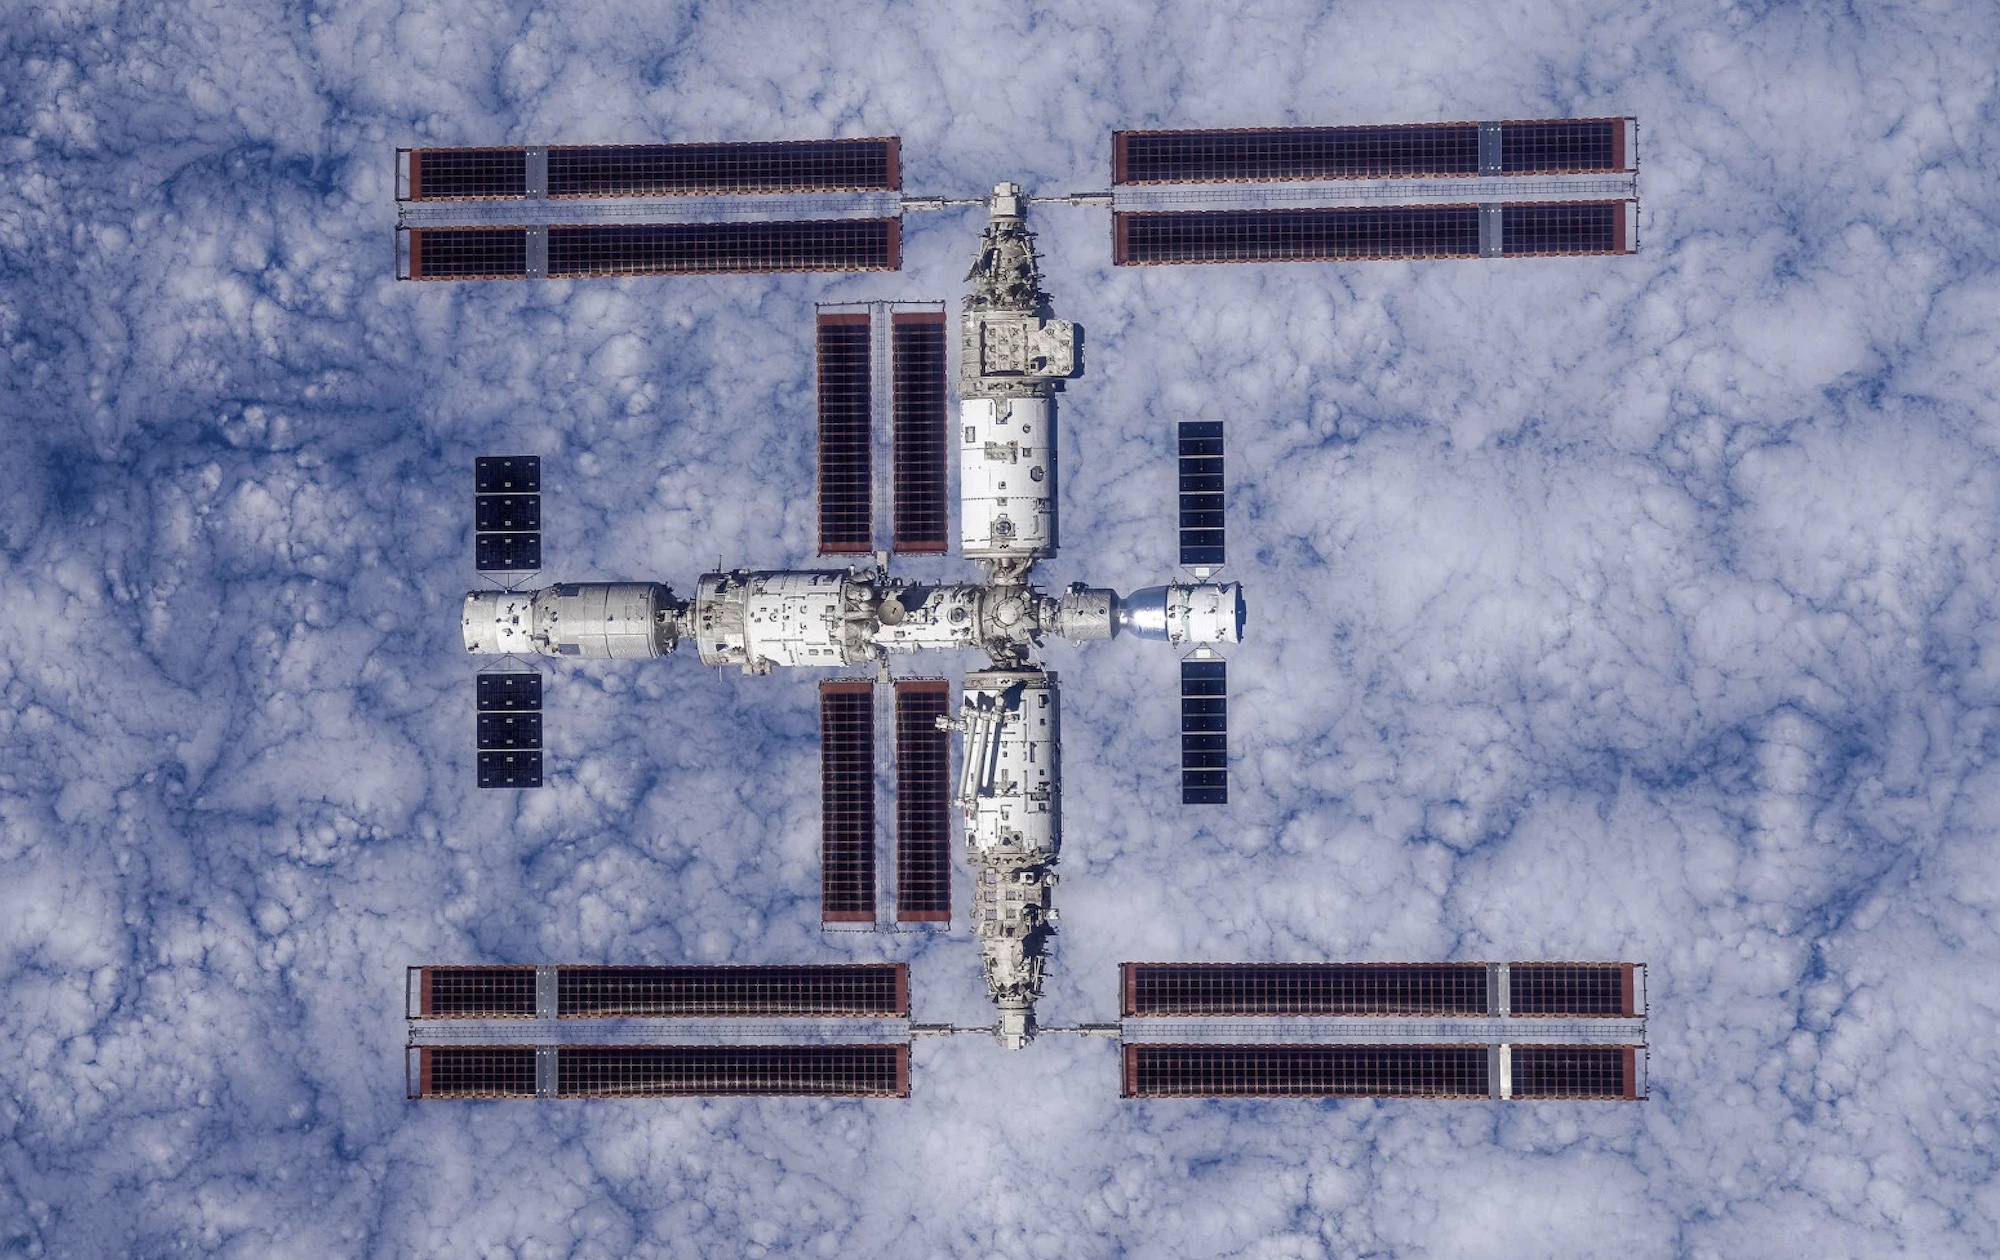 China's Tiangong space station shown from above.